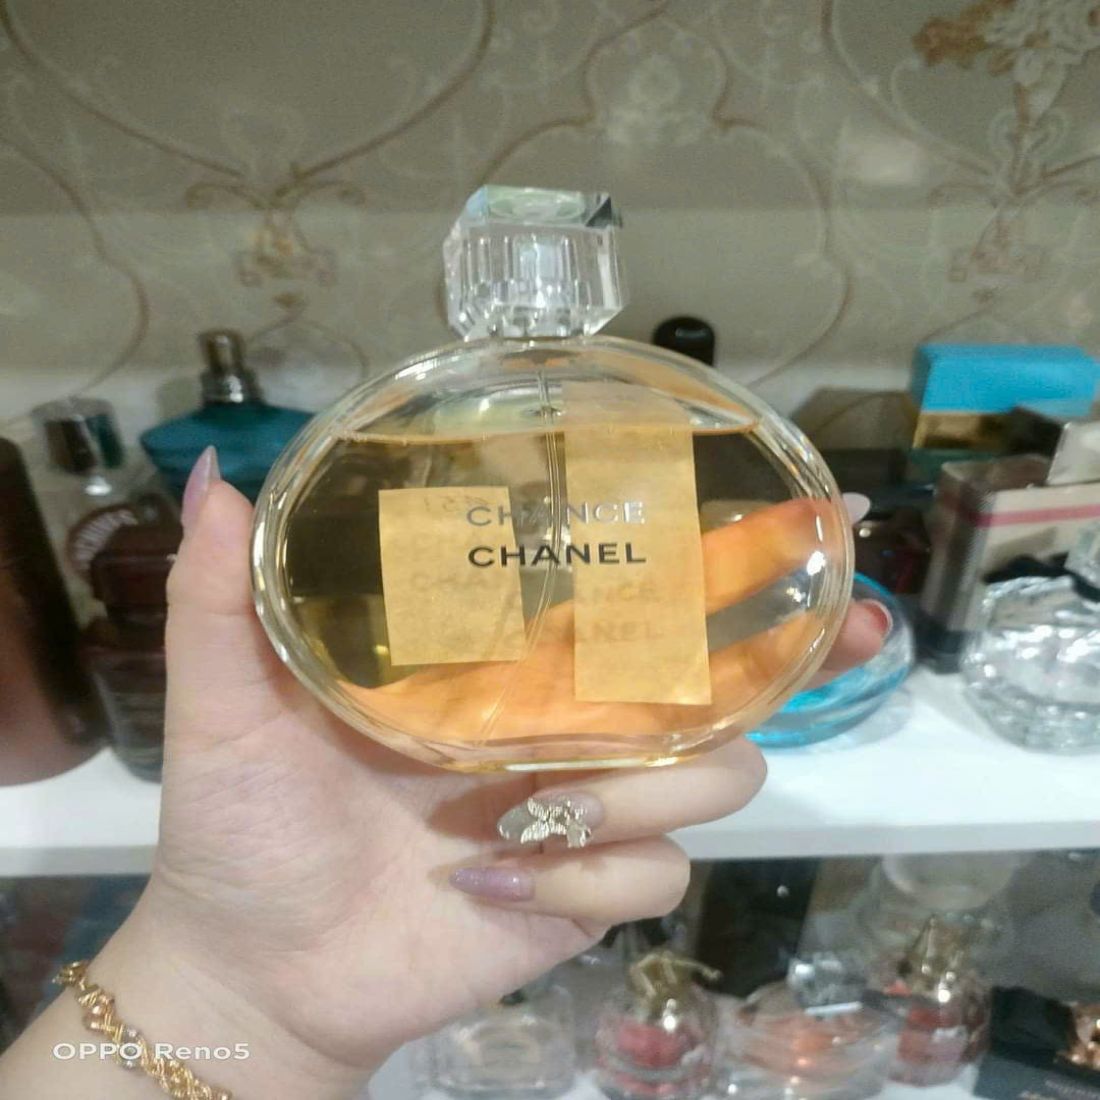 Chanel Chance EDT